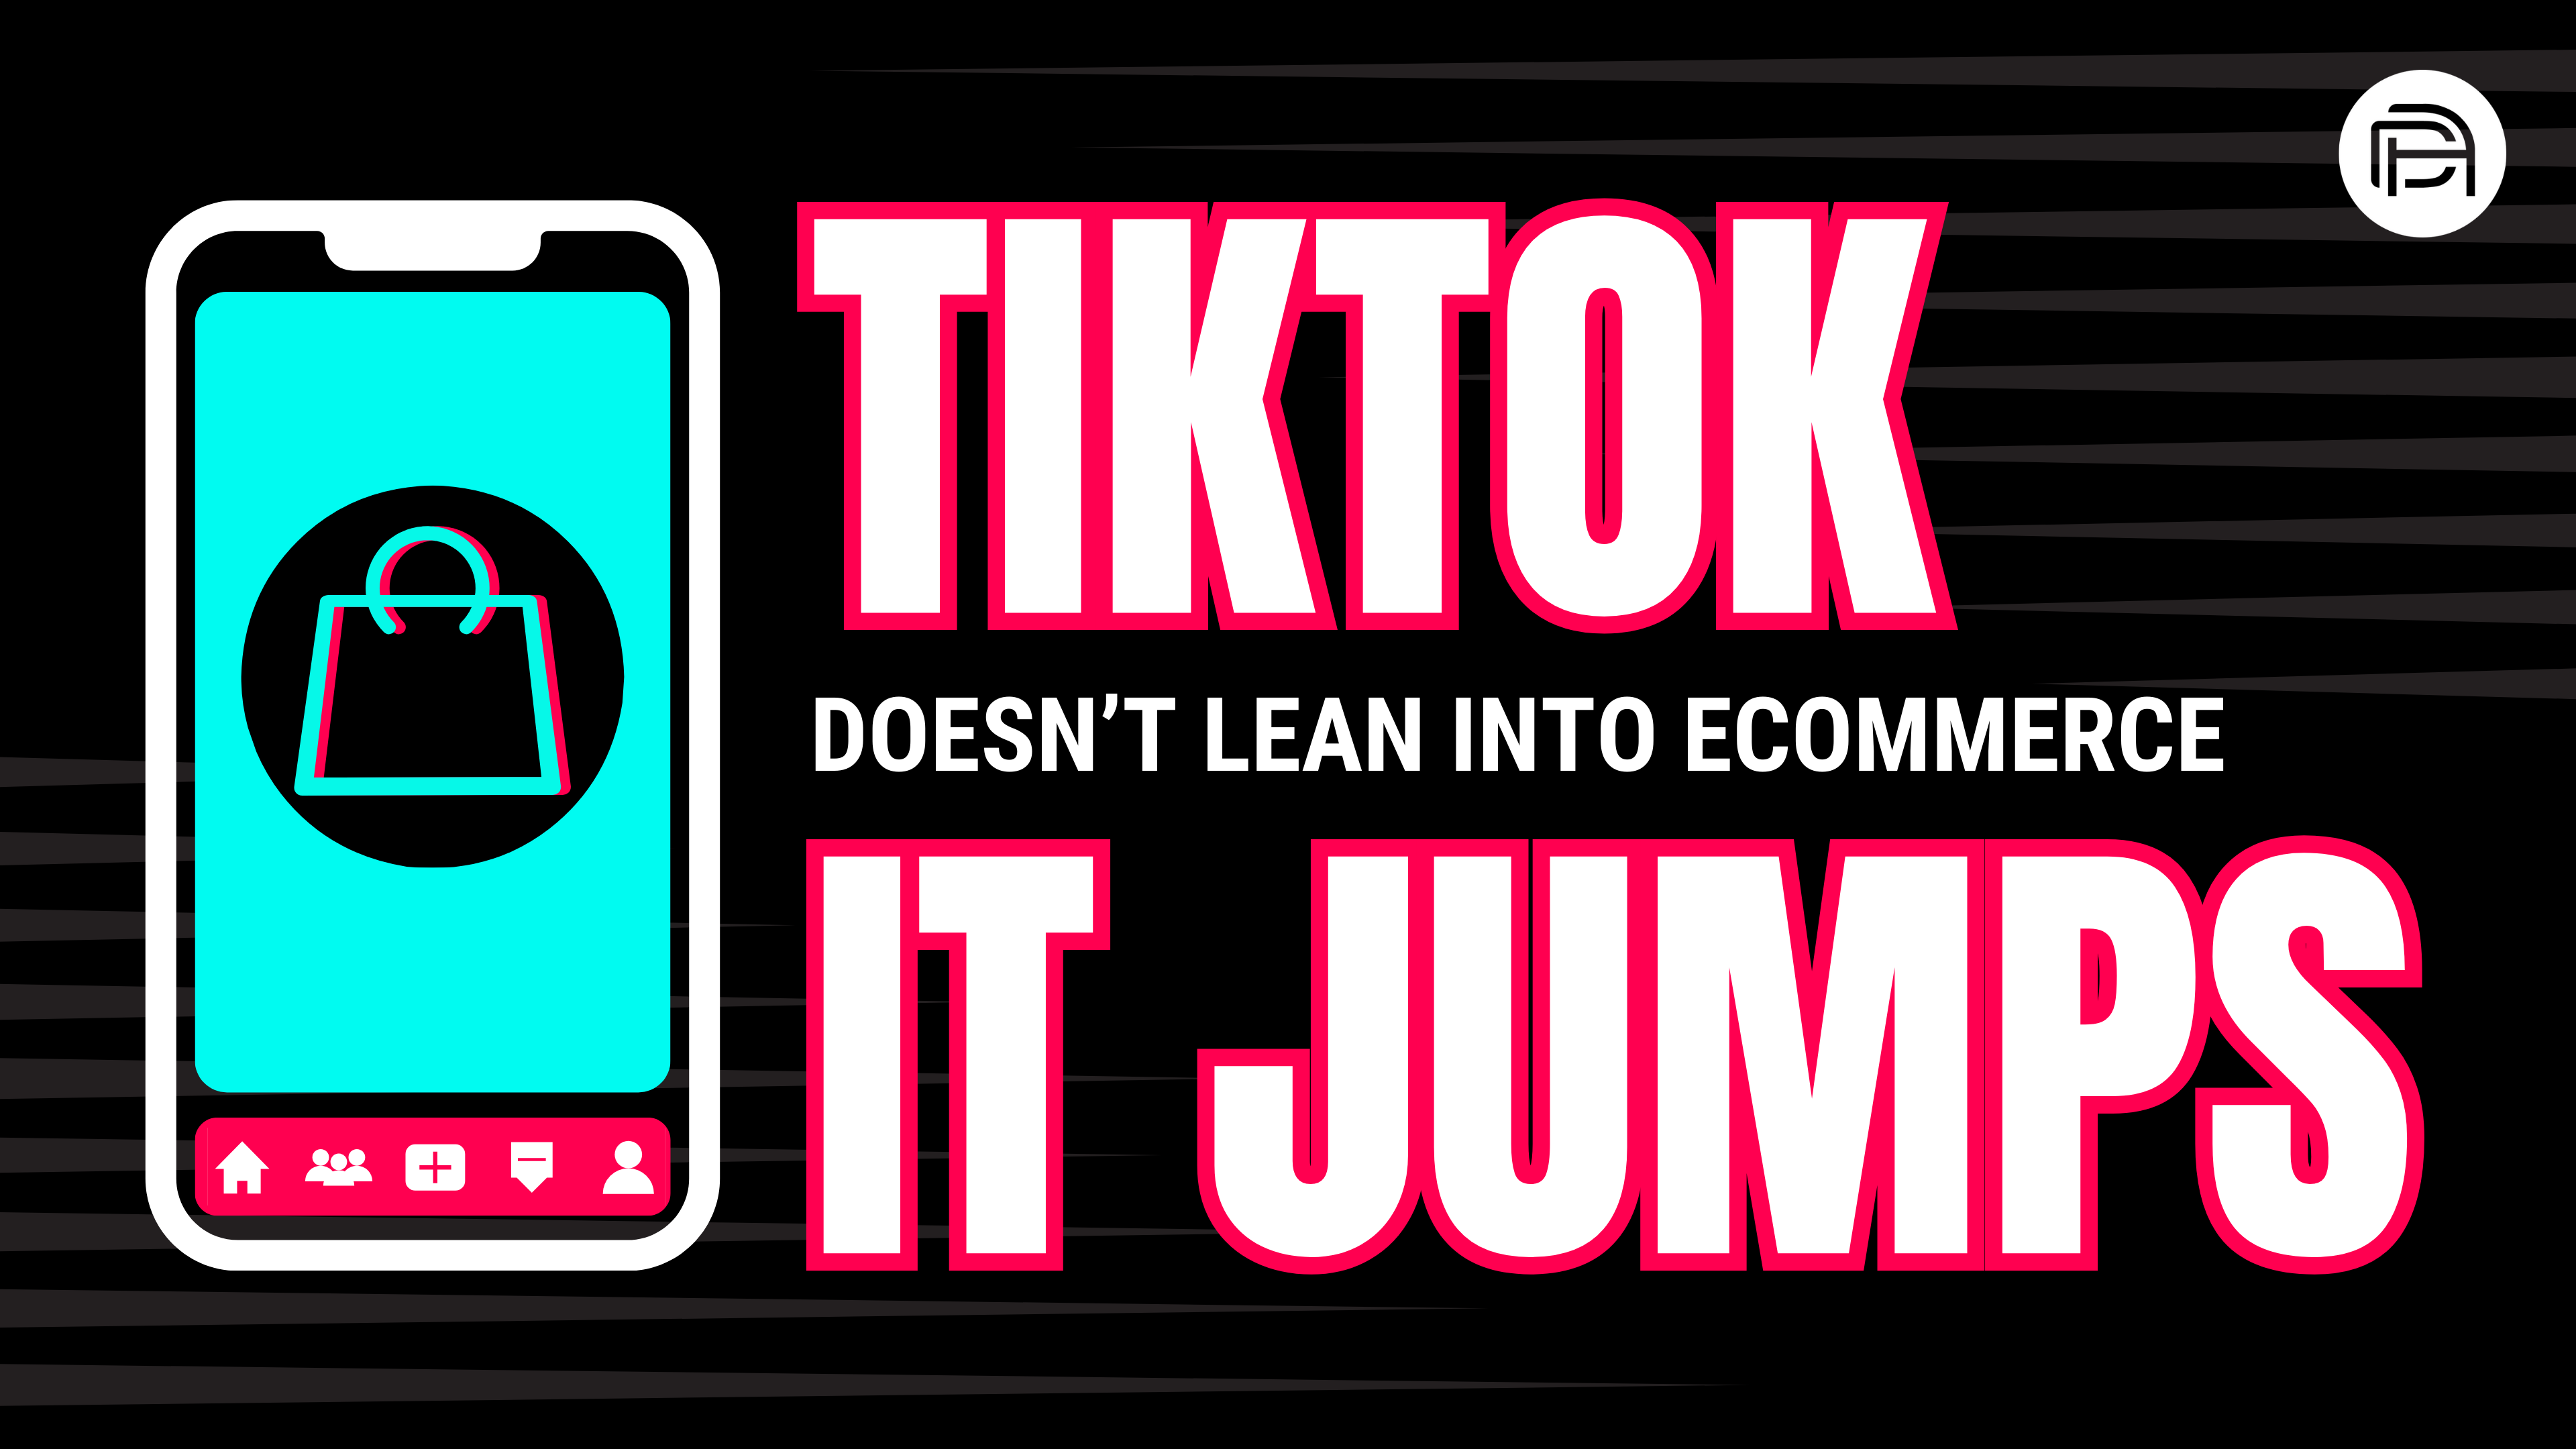 TikTok Doesn’t Lean in to eCommerce, It Jumps